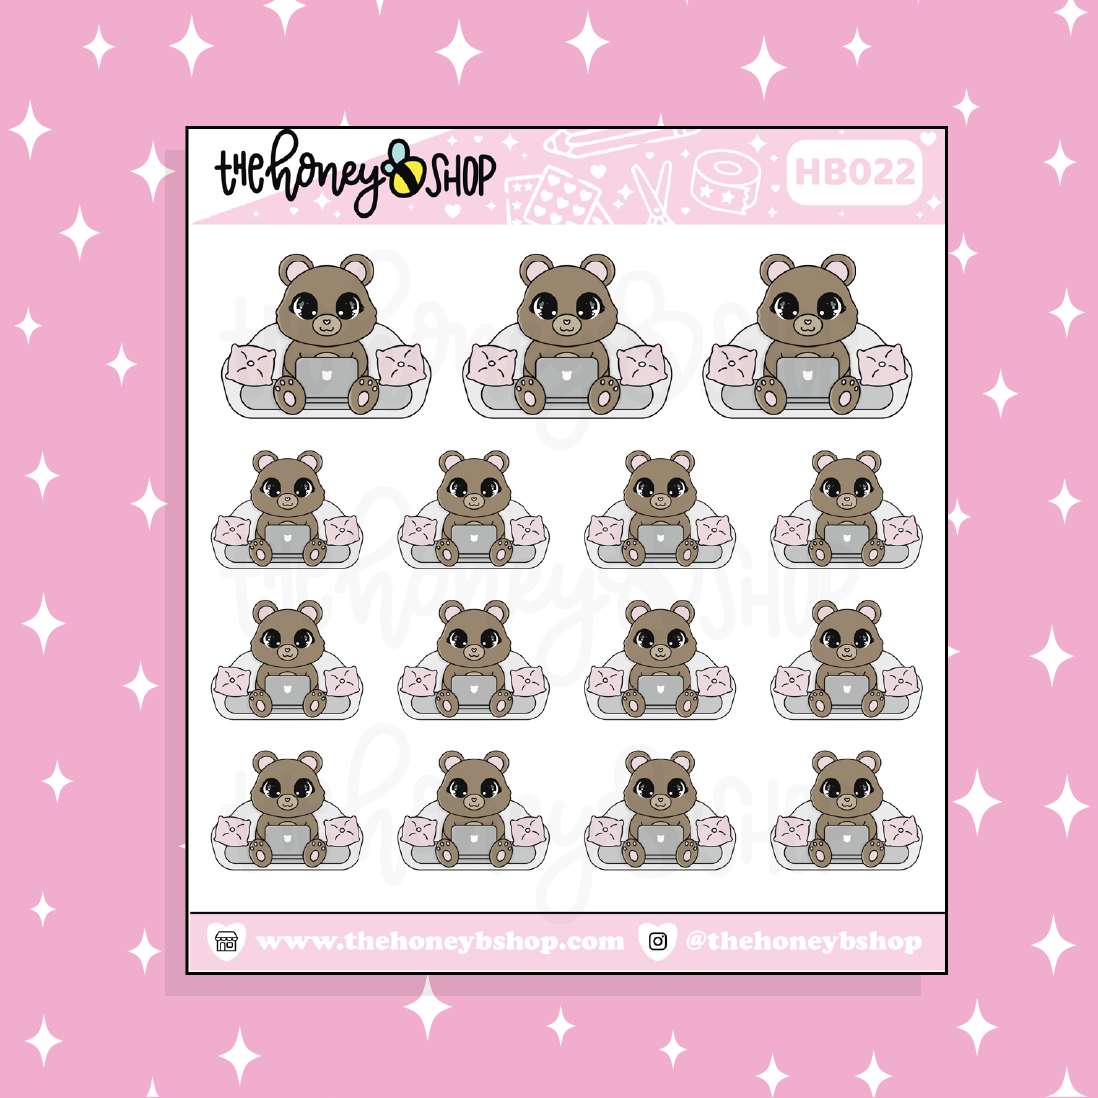 Work From Home Honey Bear Doodle Sticker | Choose Your Version